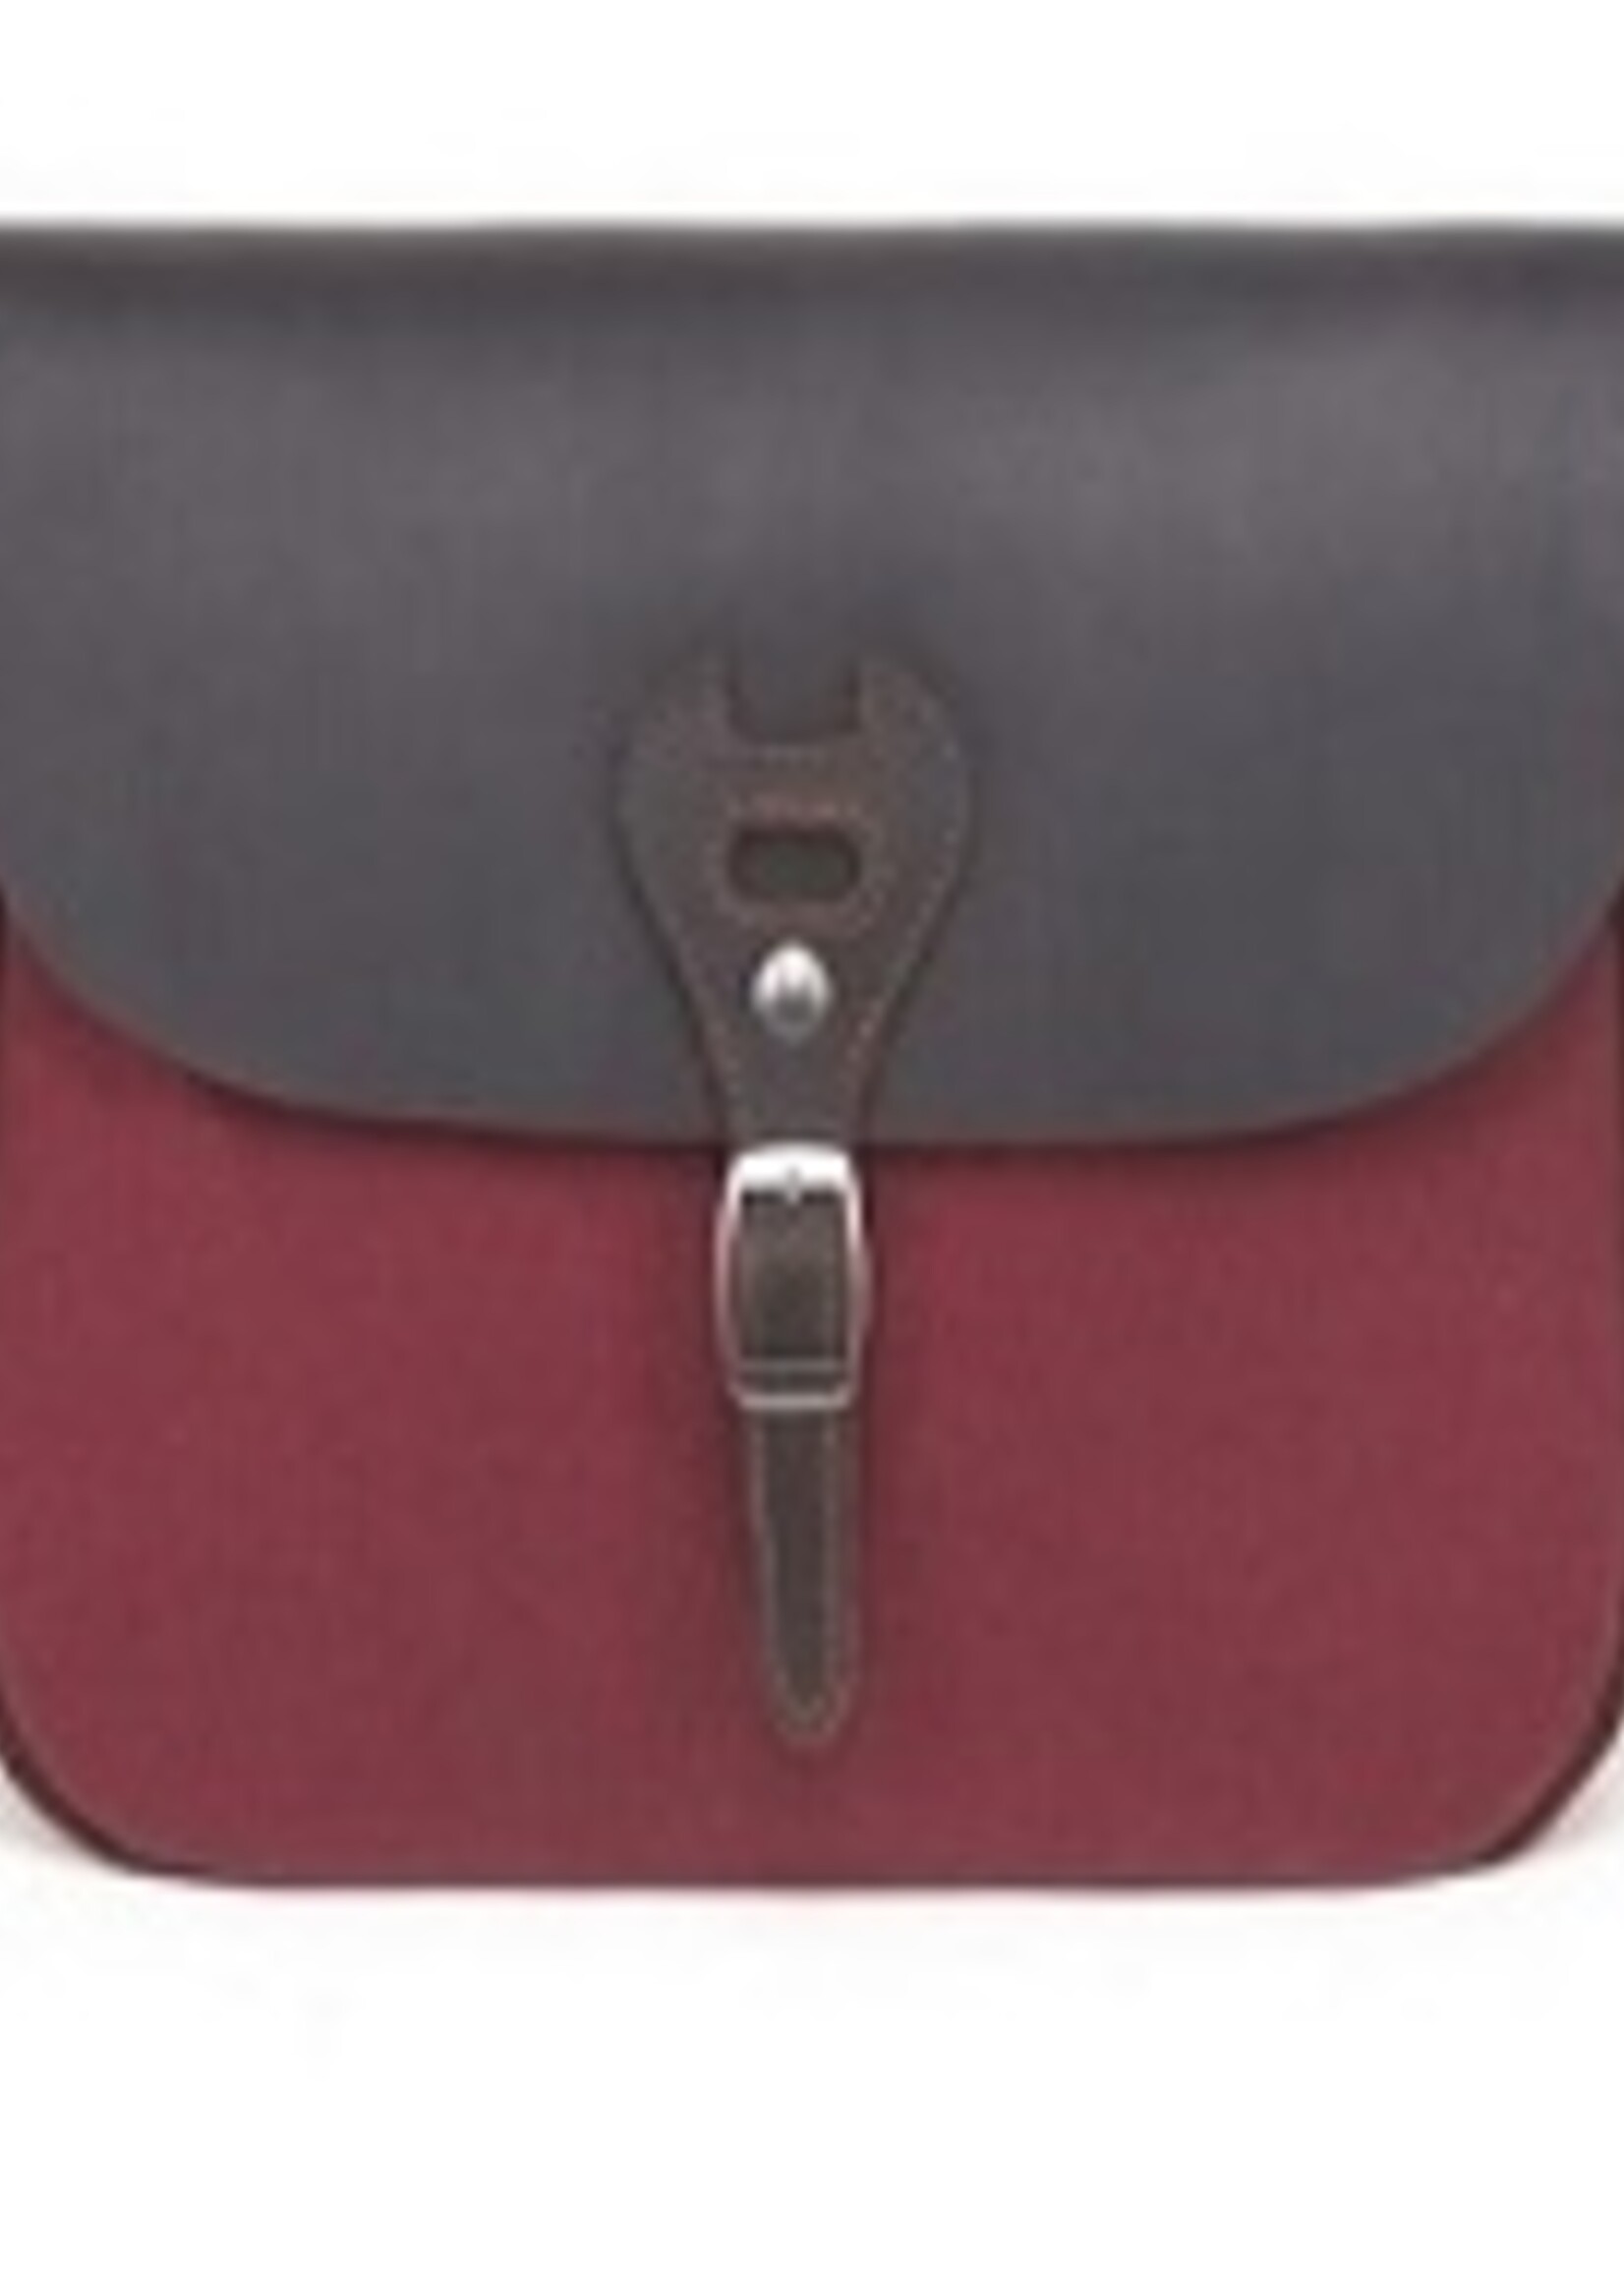 Da Van Waxed Canvas Shoulder Bag with Leather Front Closure * Burgundy